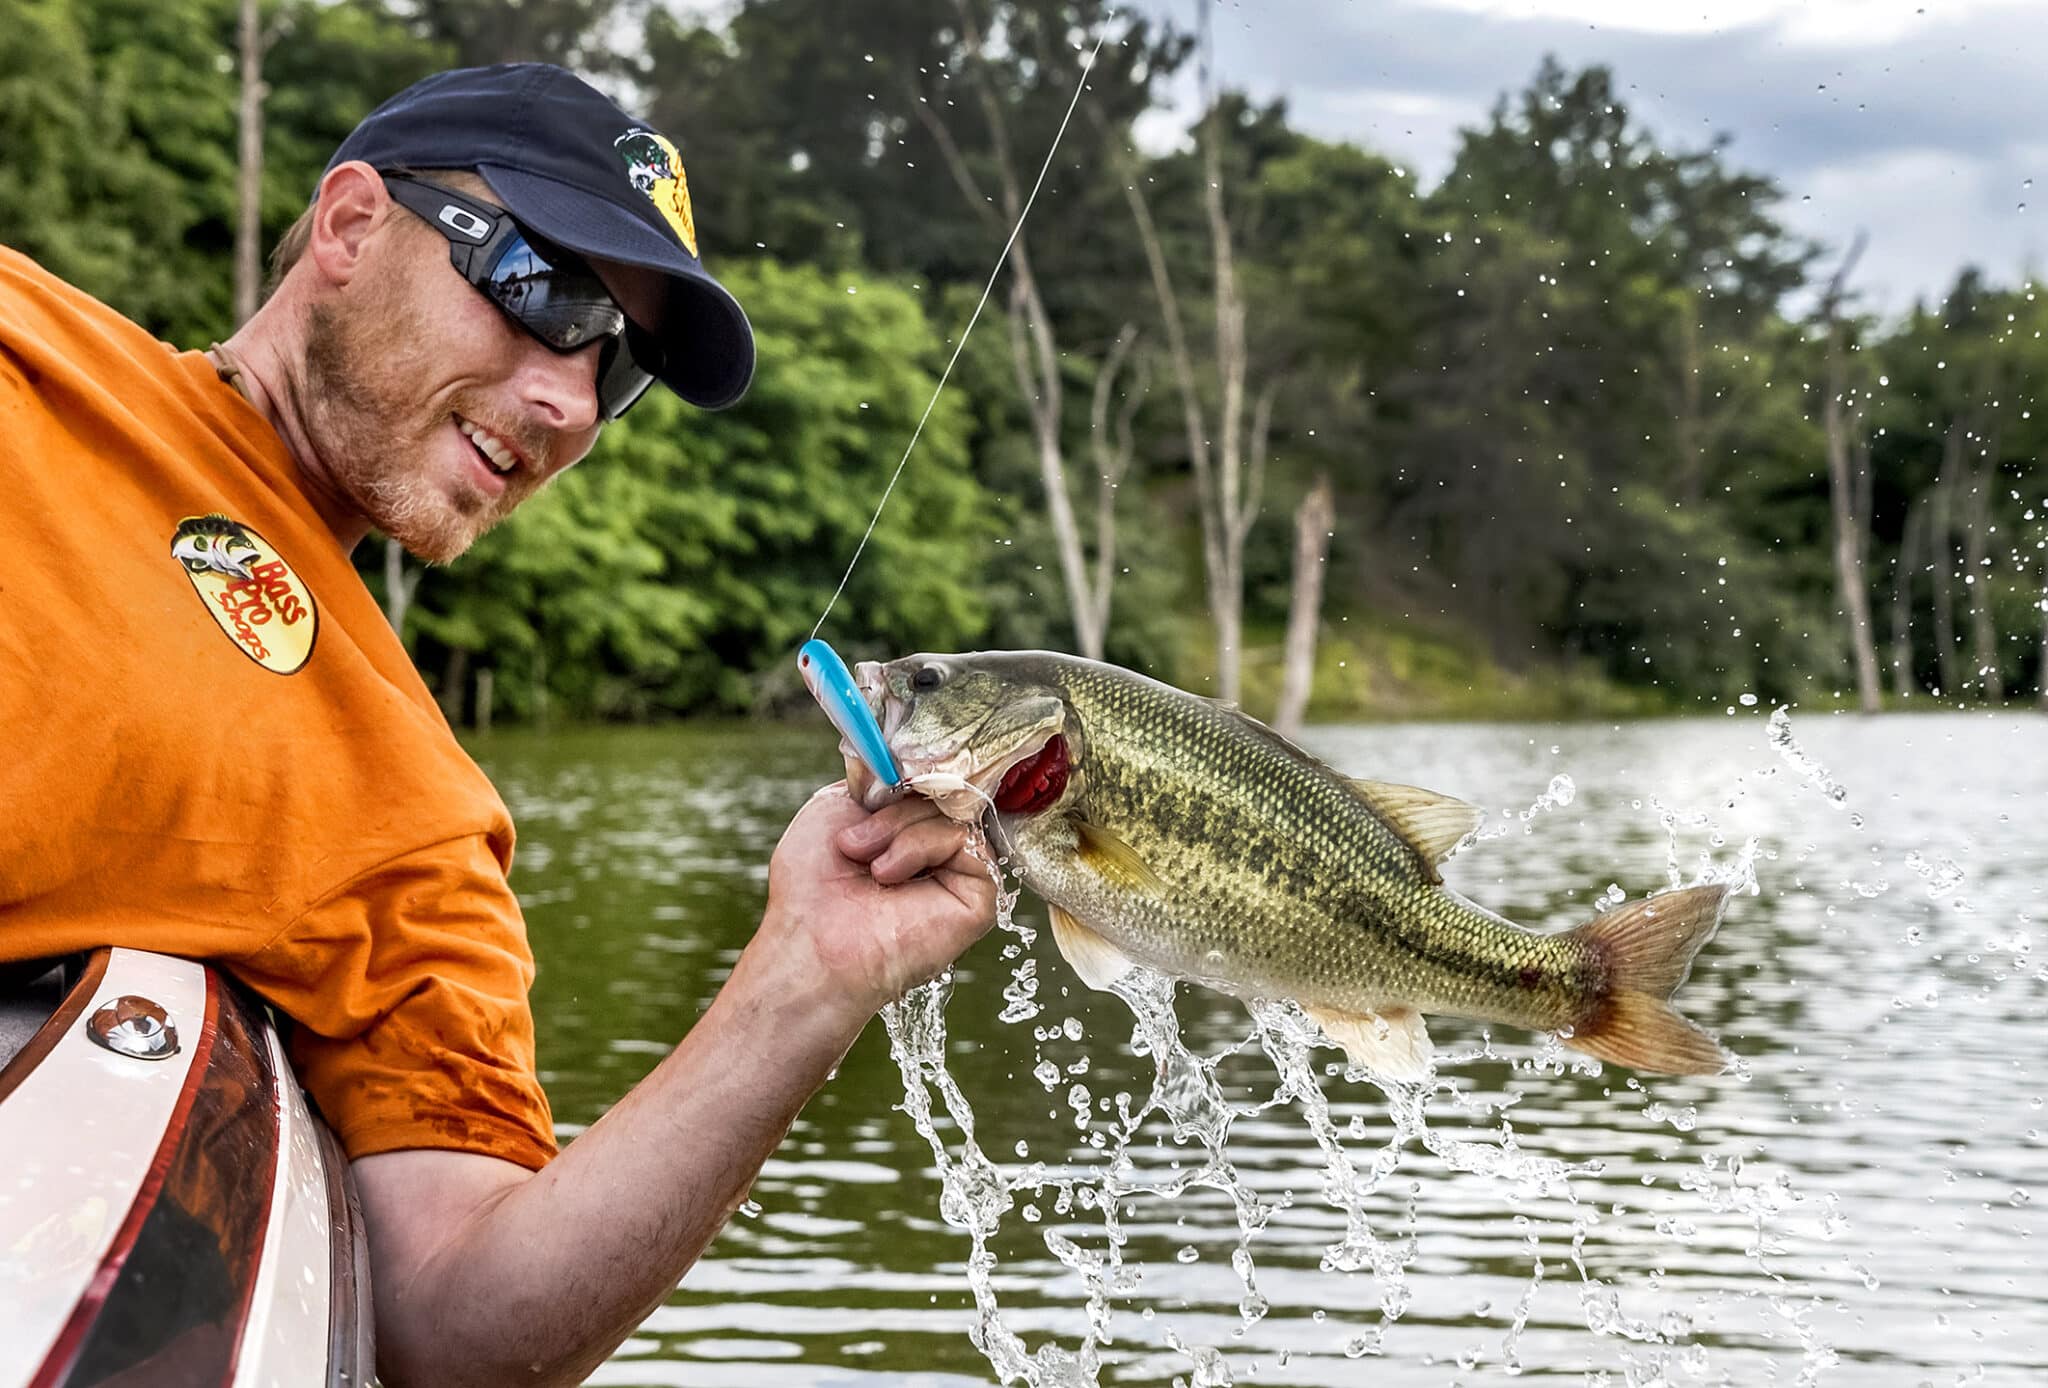 The Lunker List: Fishing Gear You Should Buy this Spring